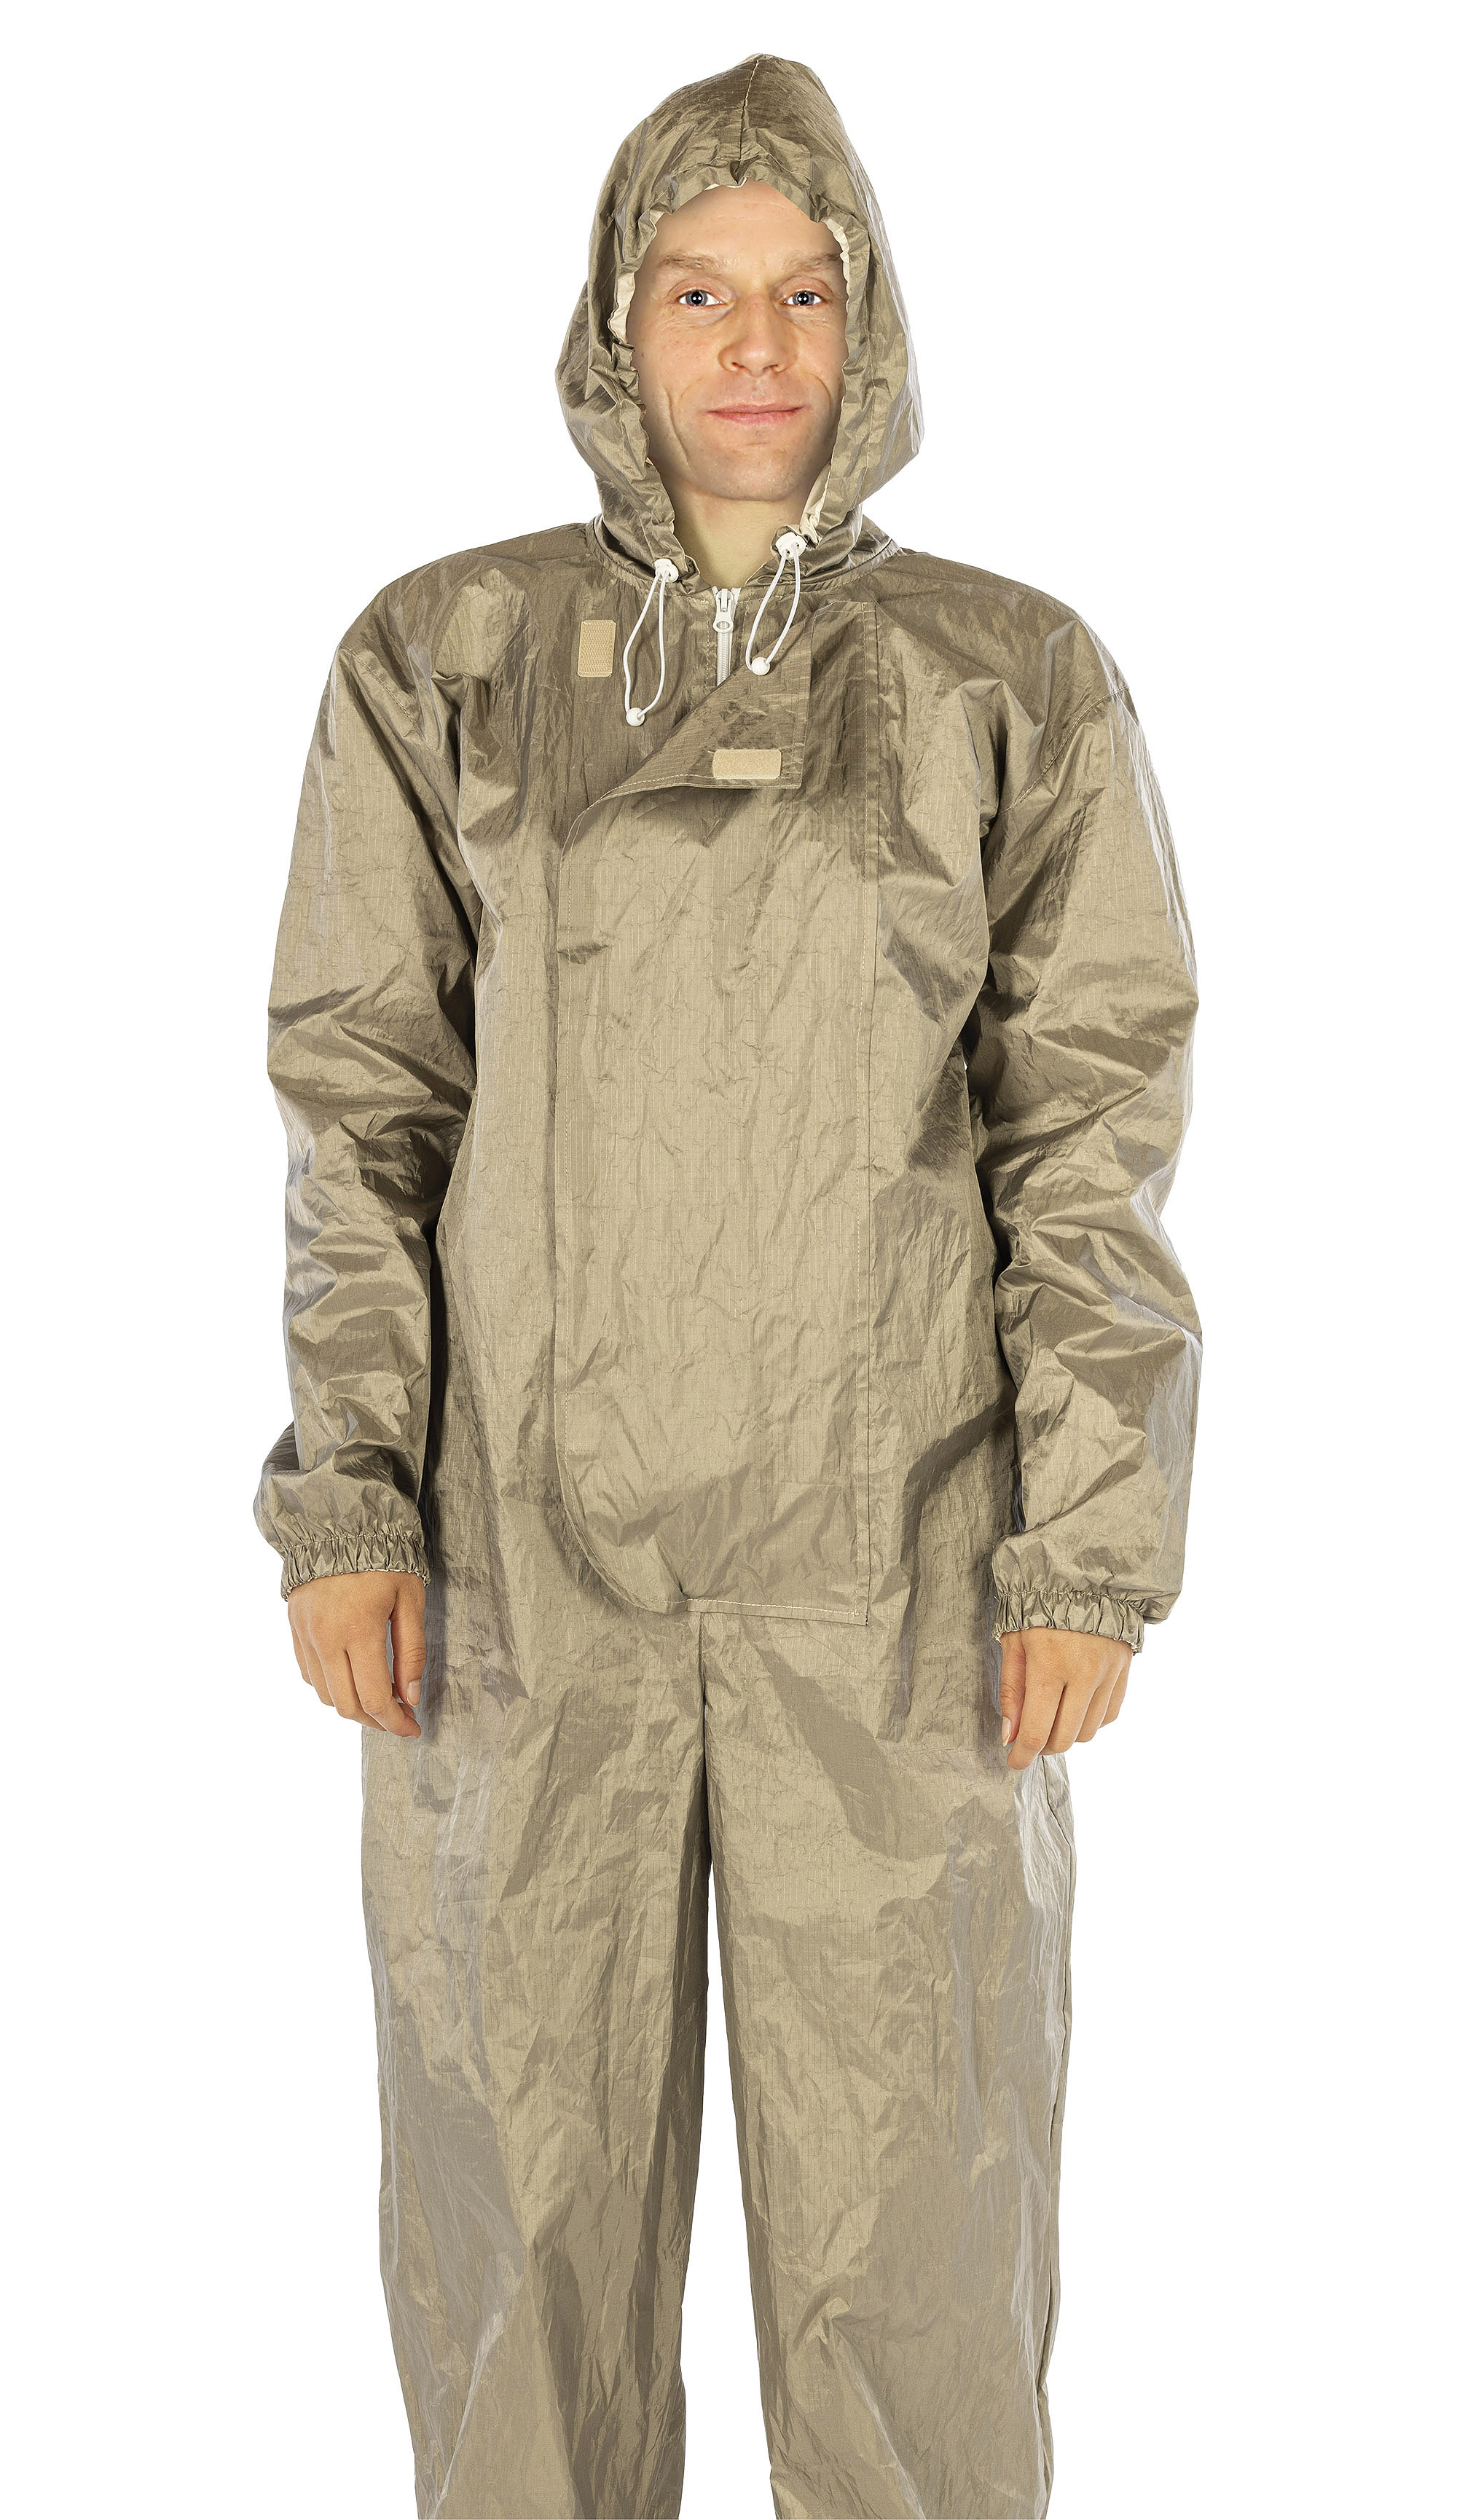 EMF Protection suit Extreme Safe 82dB at 3.5GHz Polyester, Copper and  Nickel - WAVESAFE